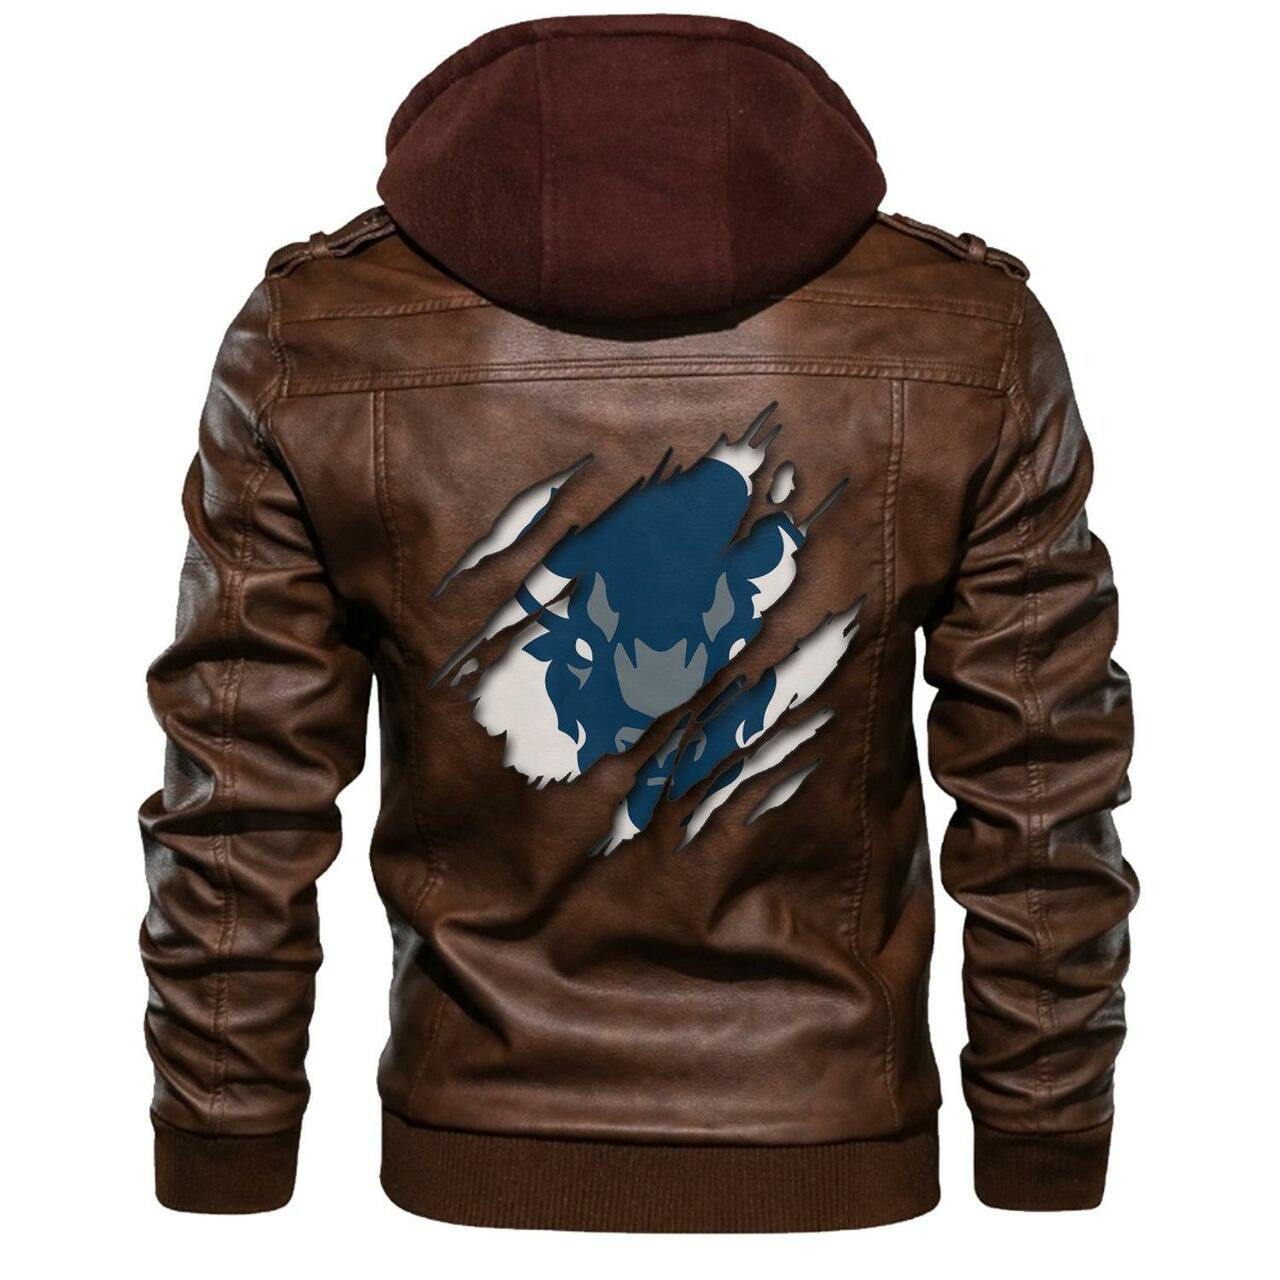 Don't wait another minute, Get Hot Leather Jacket today 58